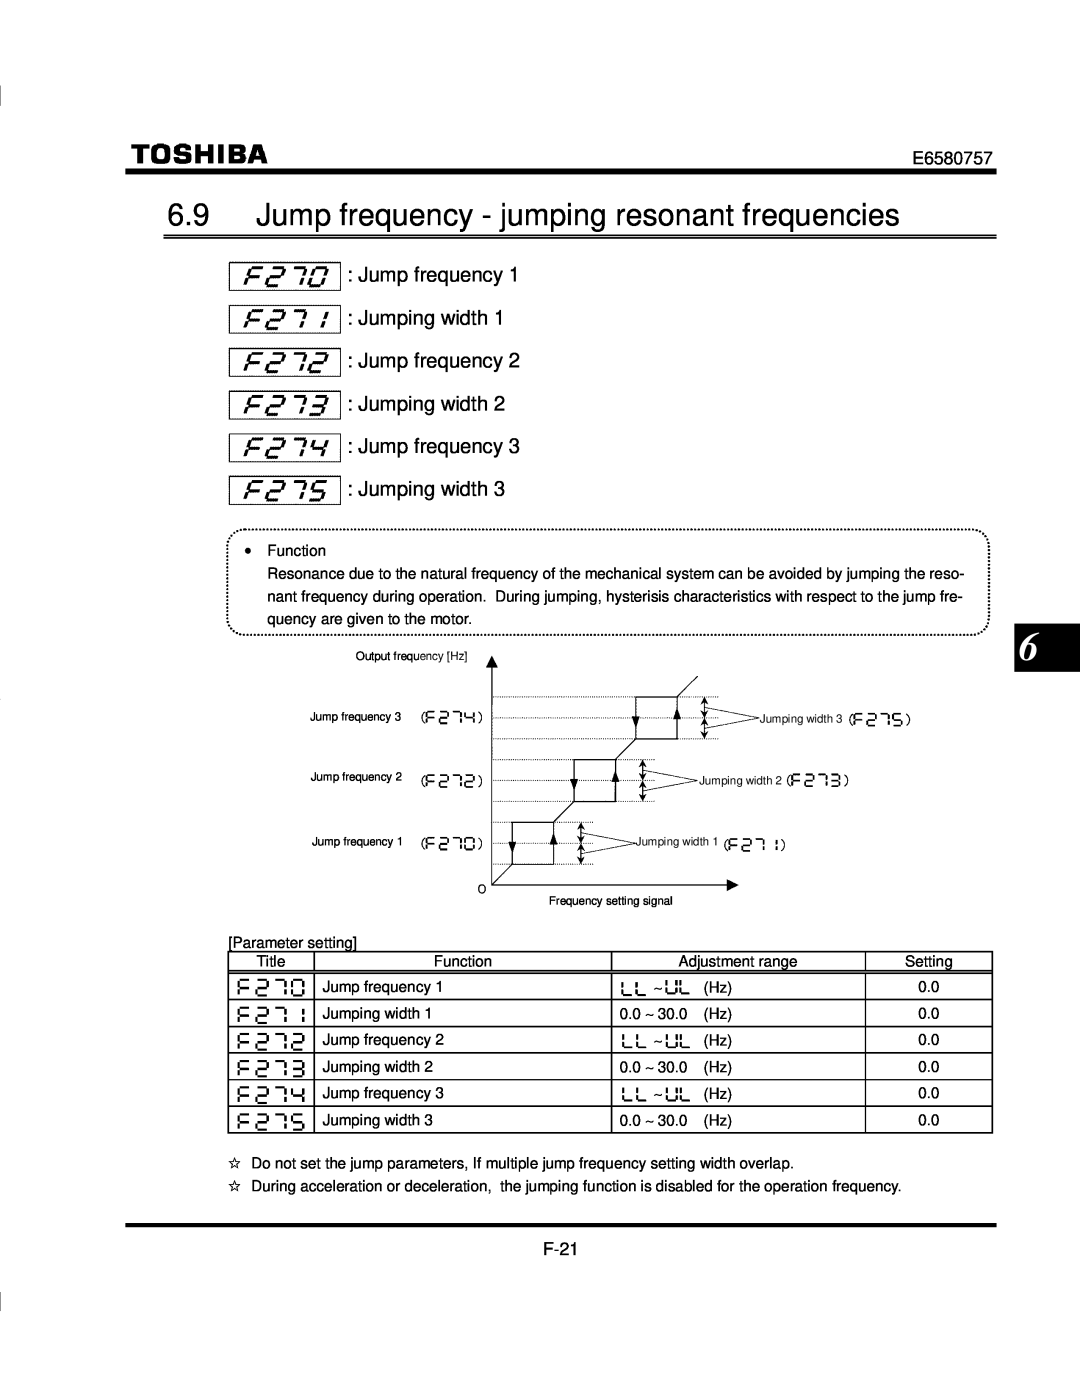 Toshiba VF-S9 Jump frequency - jumping resonant frequencies, Jump frequency Jumping width Jump frequency Jumping width 